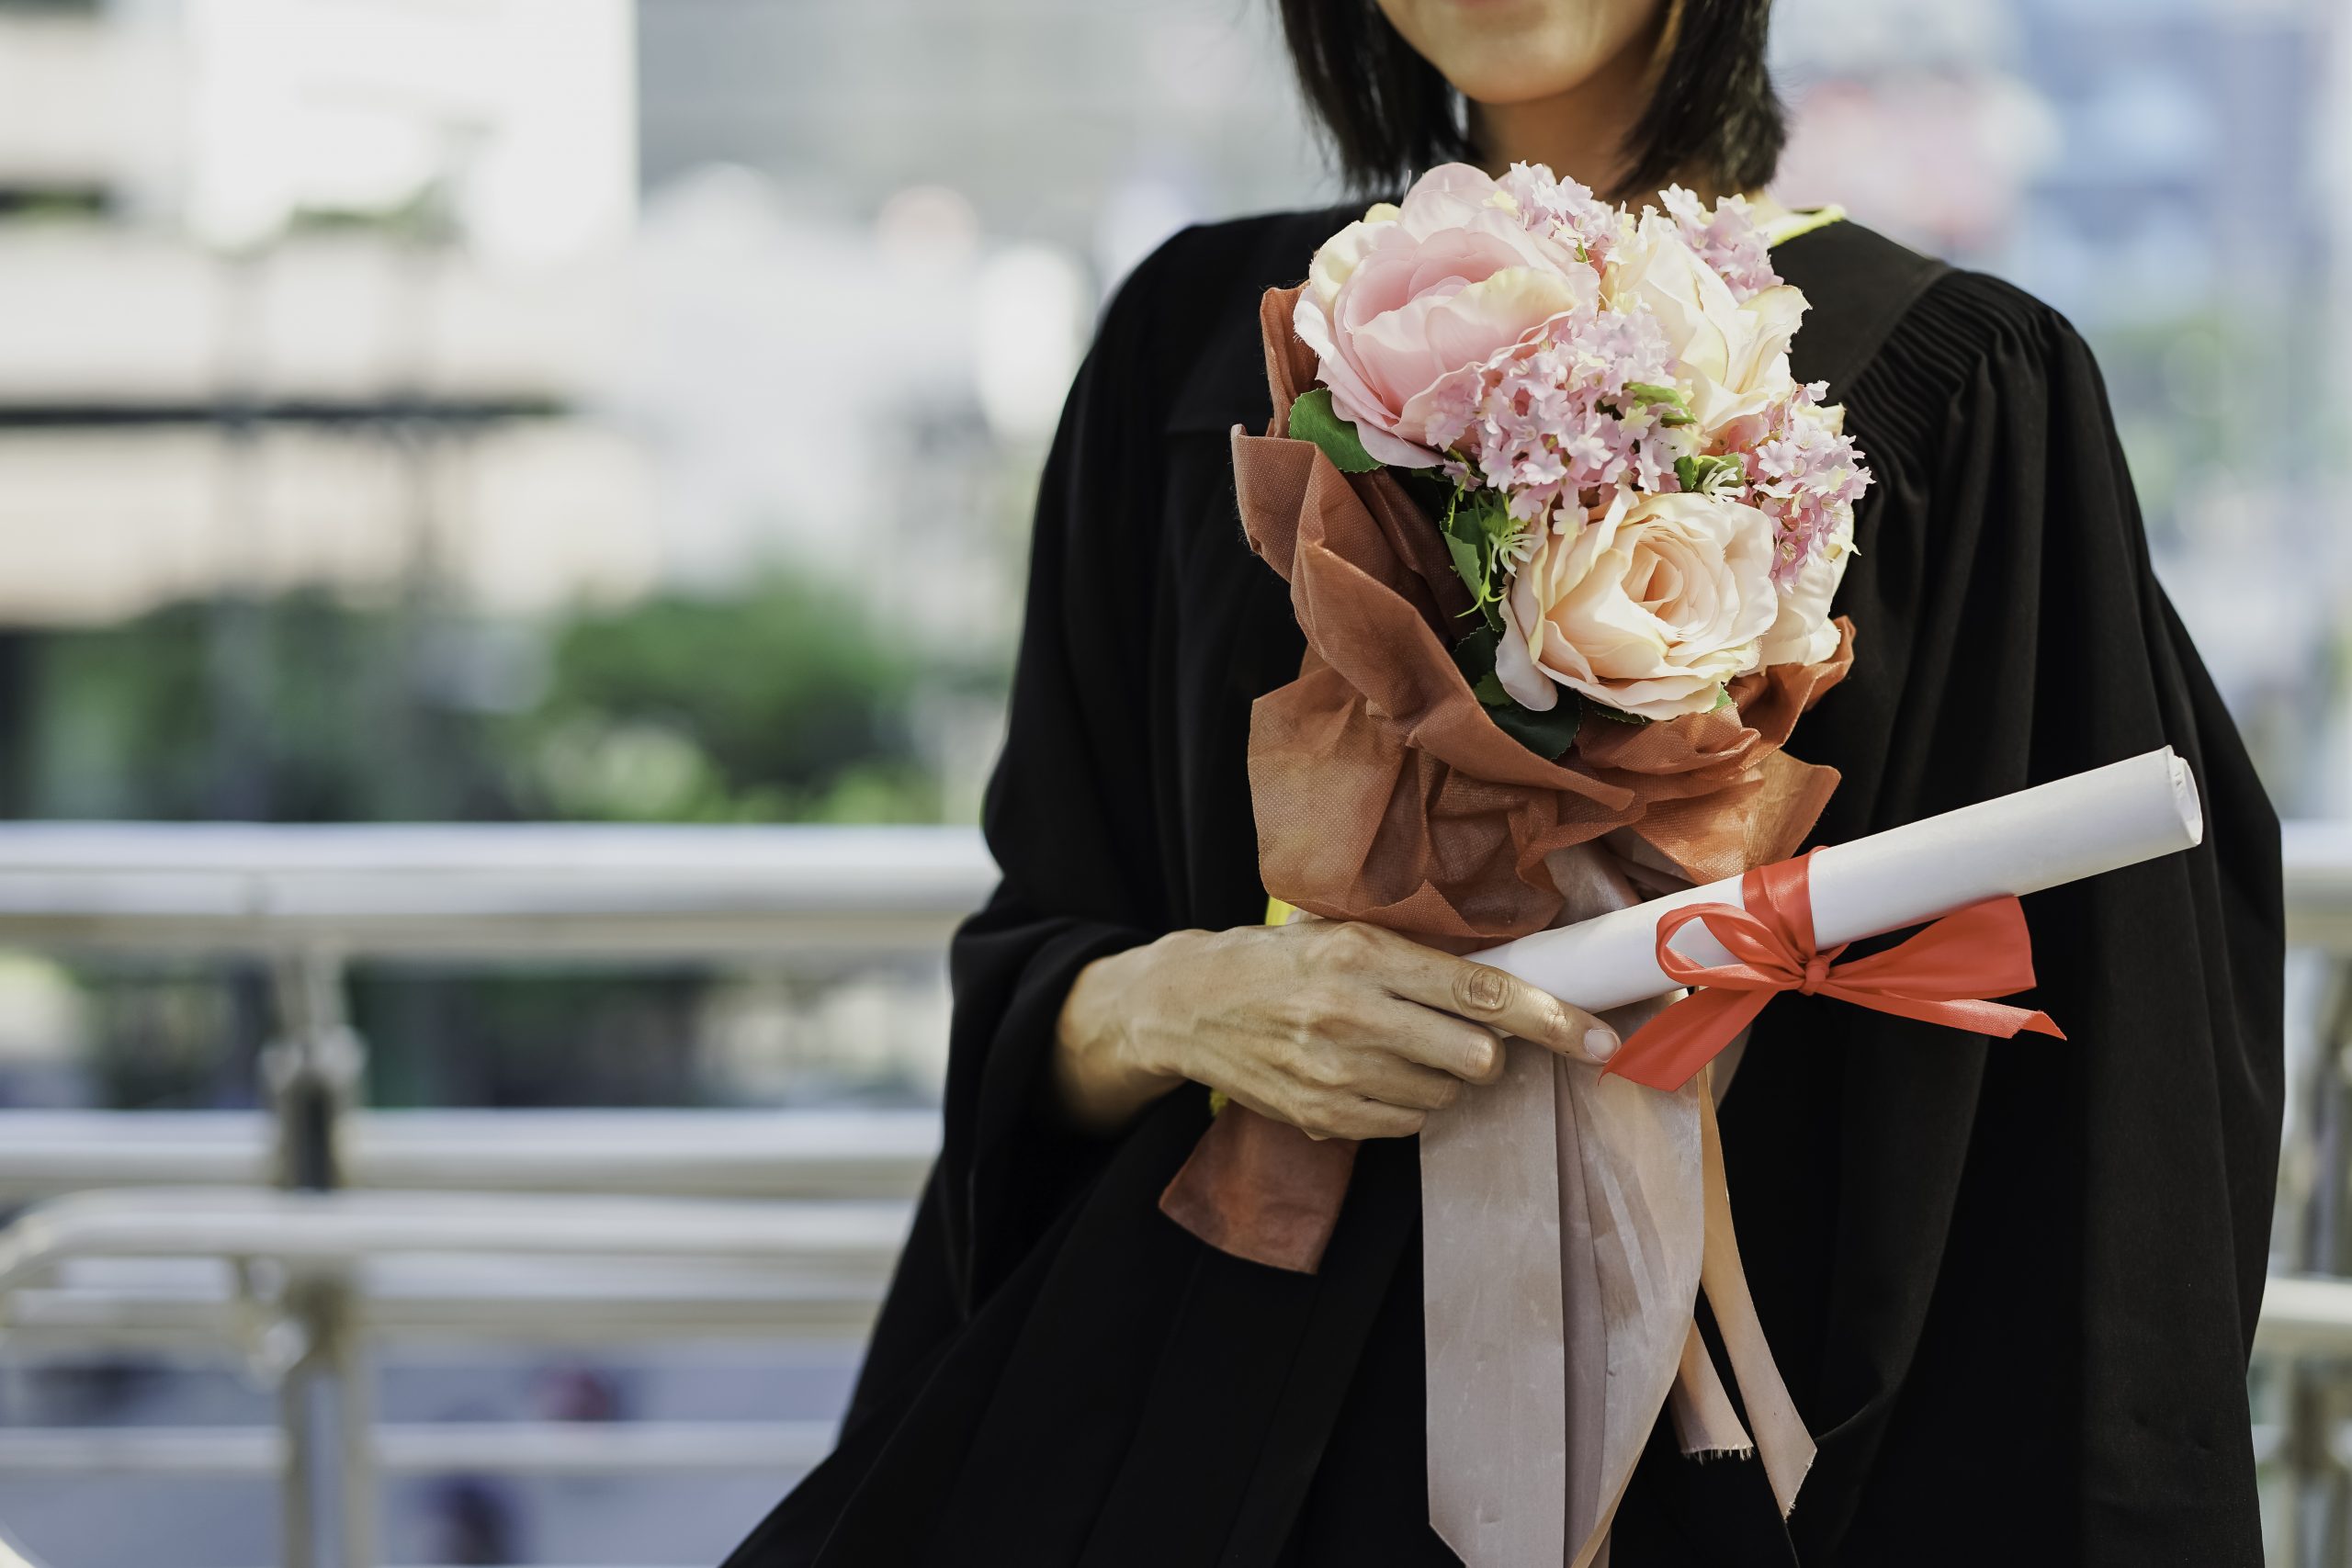 Looking to buy flowers for graduation? Click here.